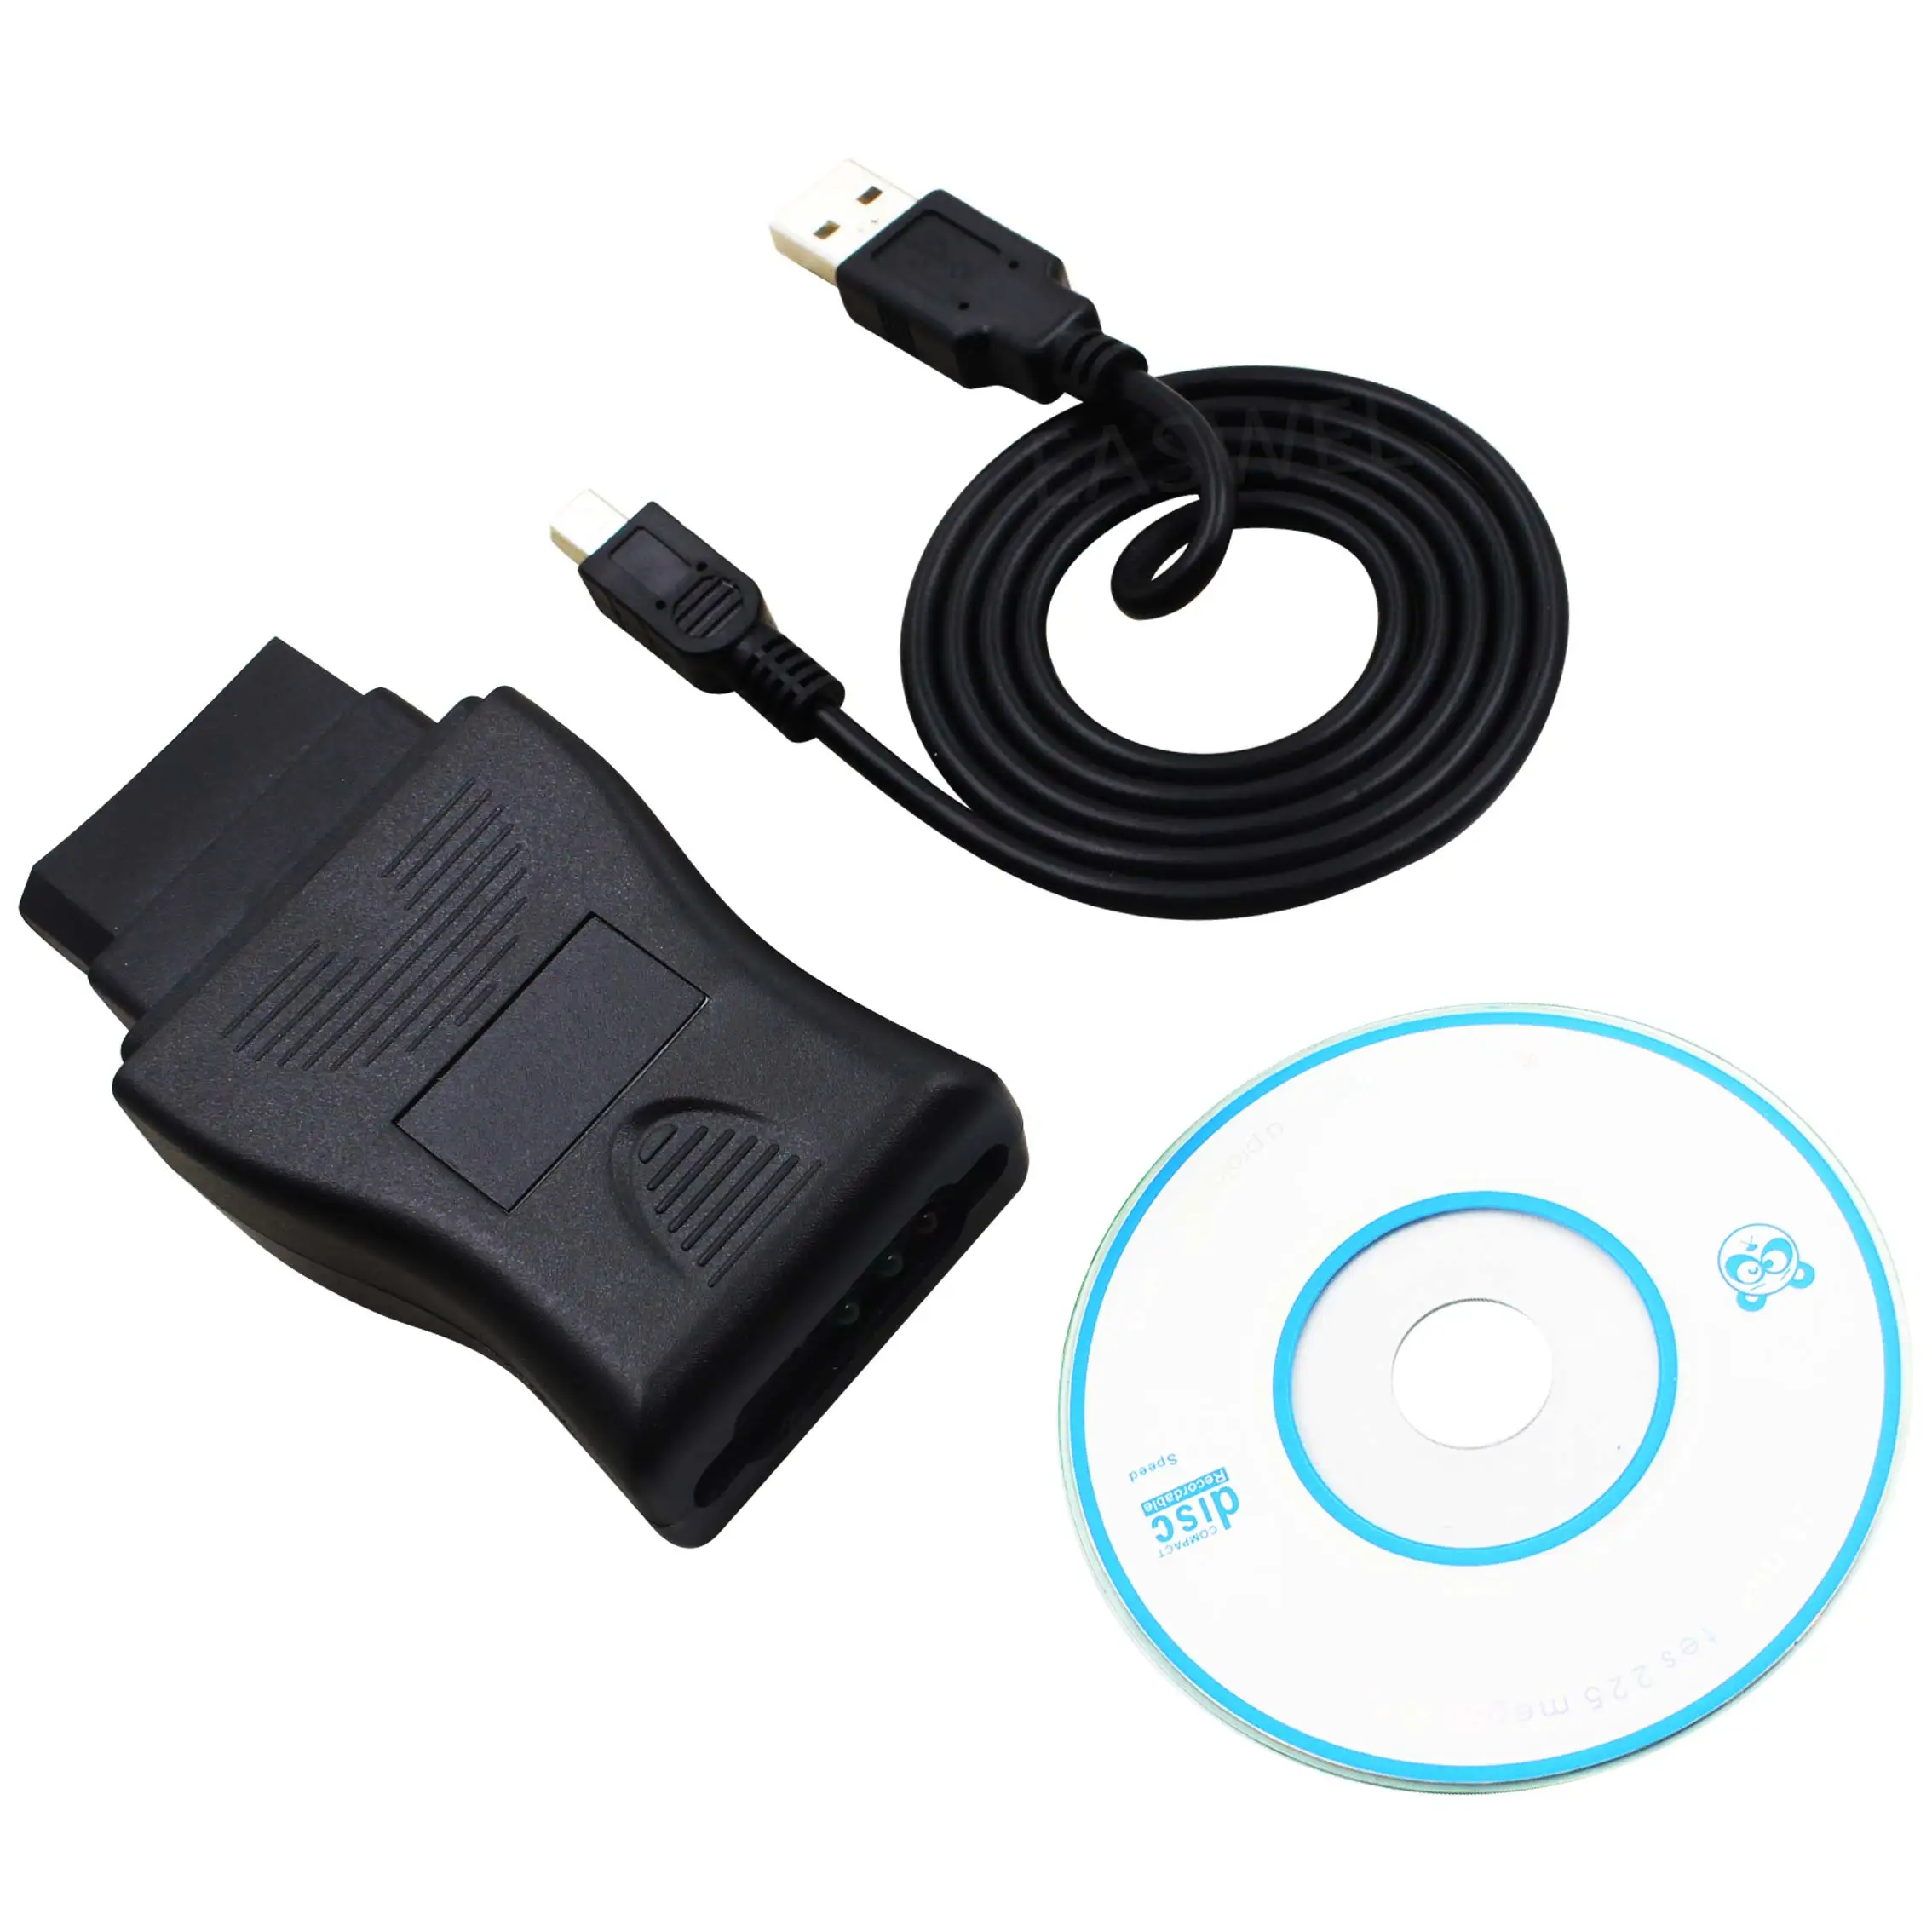 14 Pin For Nissan Consult Interface USB Car Diagnostic OBD Fault Code Cable Tool 